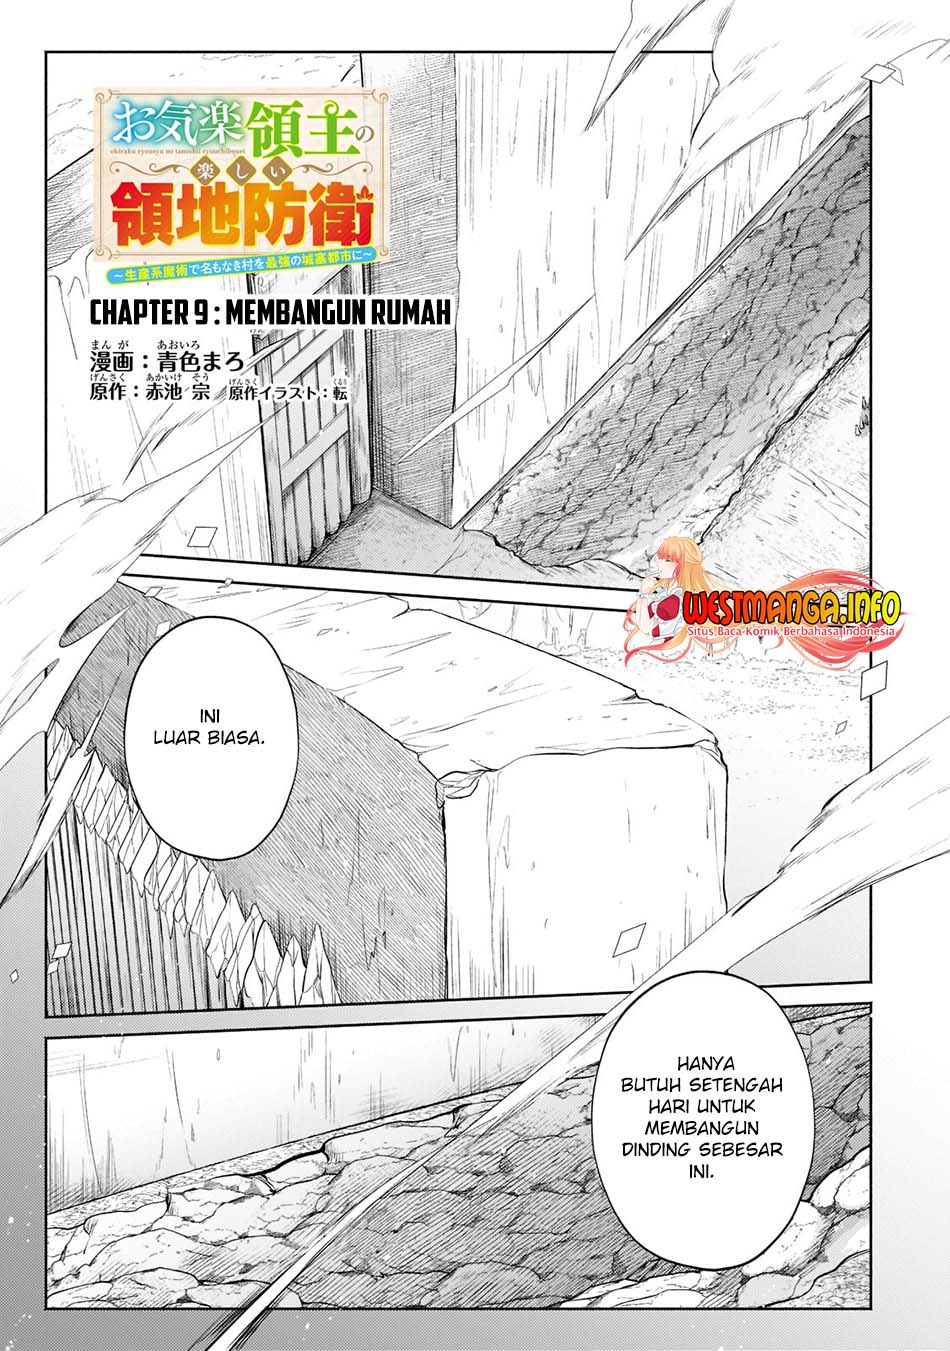 Fun Territory Defense Of The Easy-Going Lord ~The Nameless Village Is Made Into The Strongest Fortified City By Production Magic~ Chapter 09 - 177